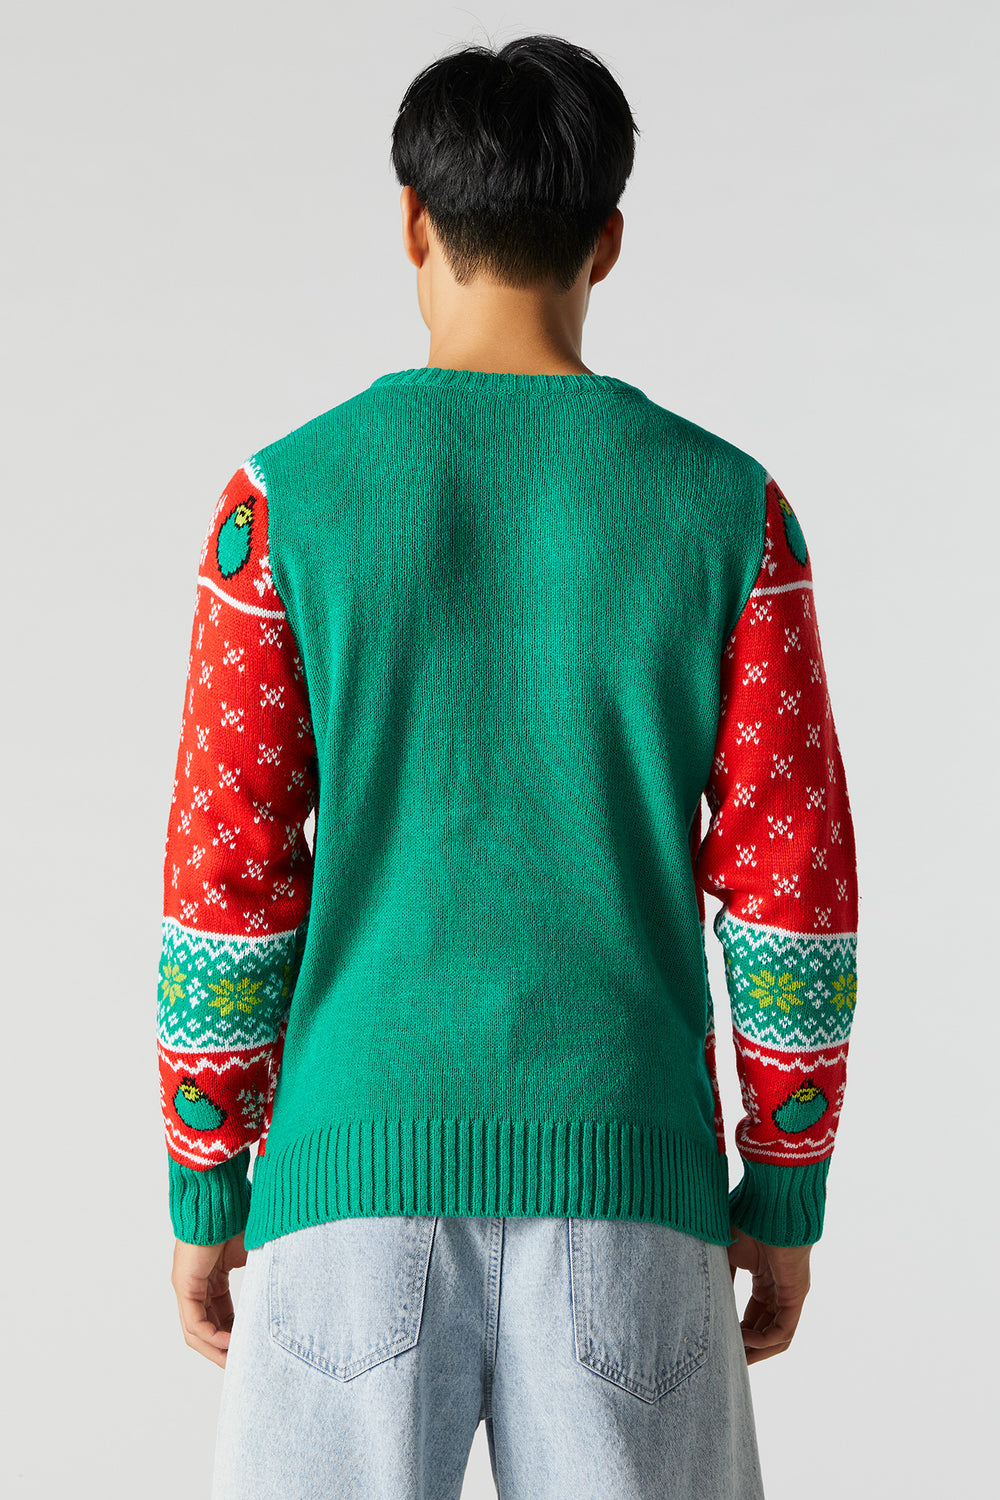 The Grinch Jacquard Knit Xmas Sweater – Charlotte Russe